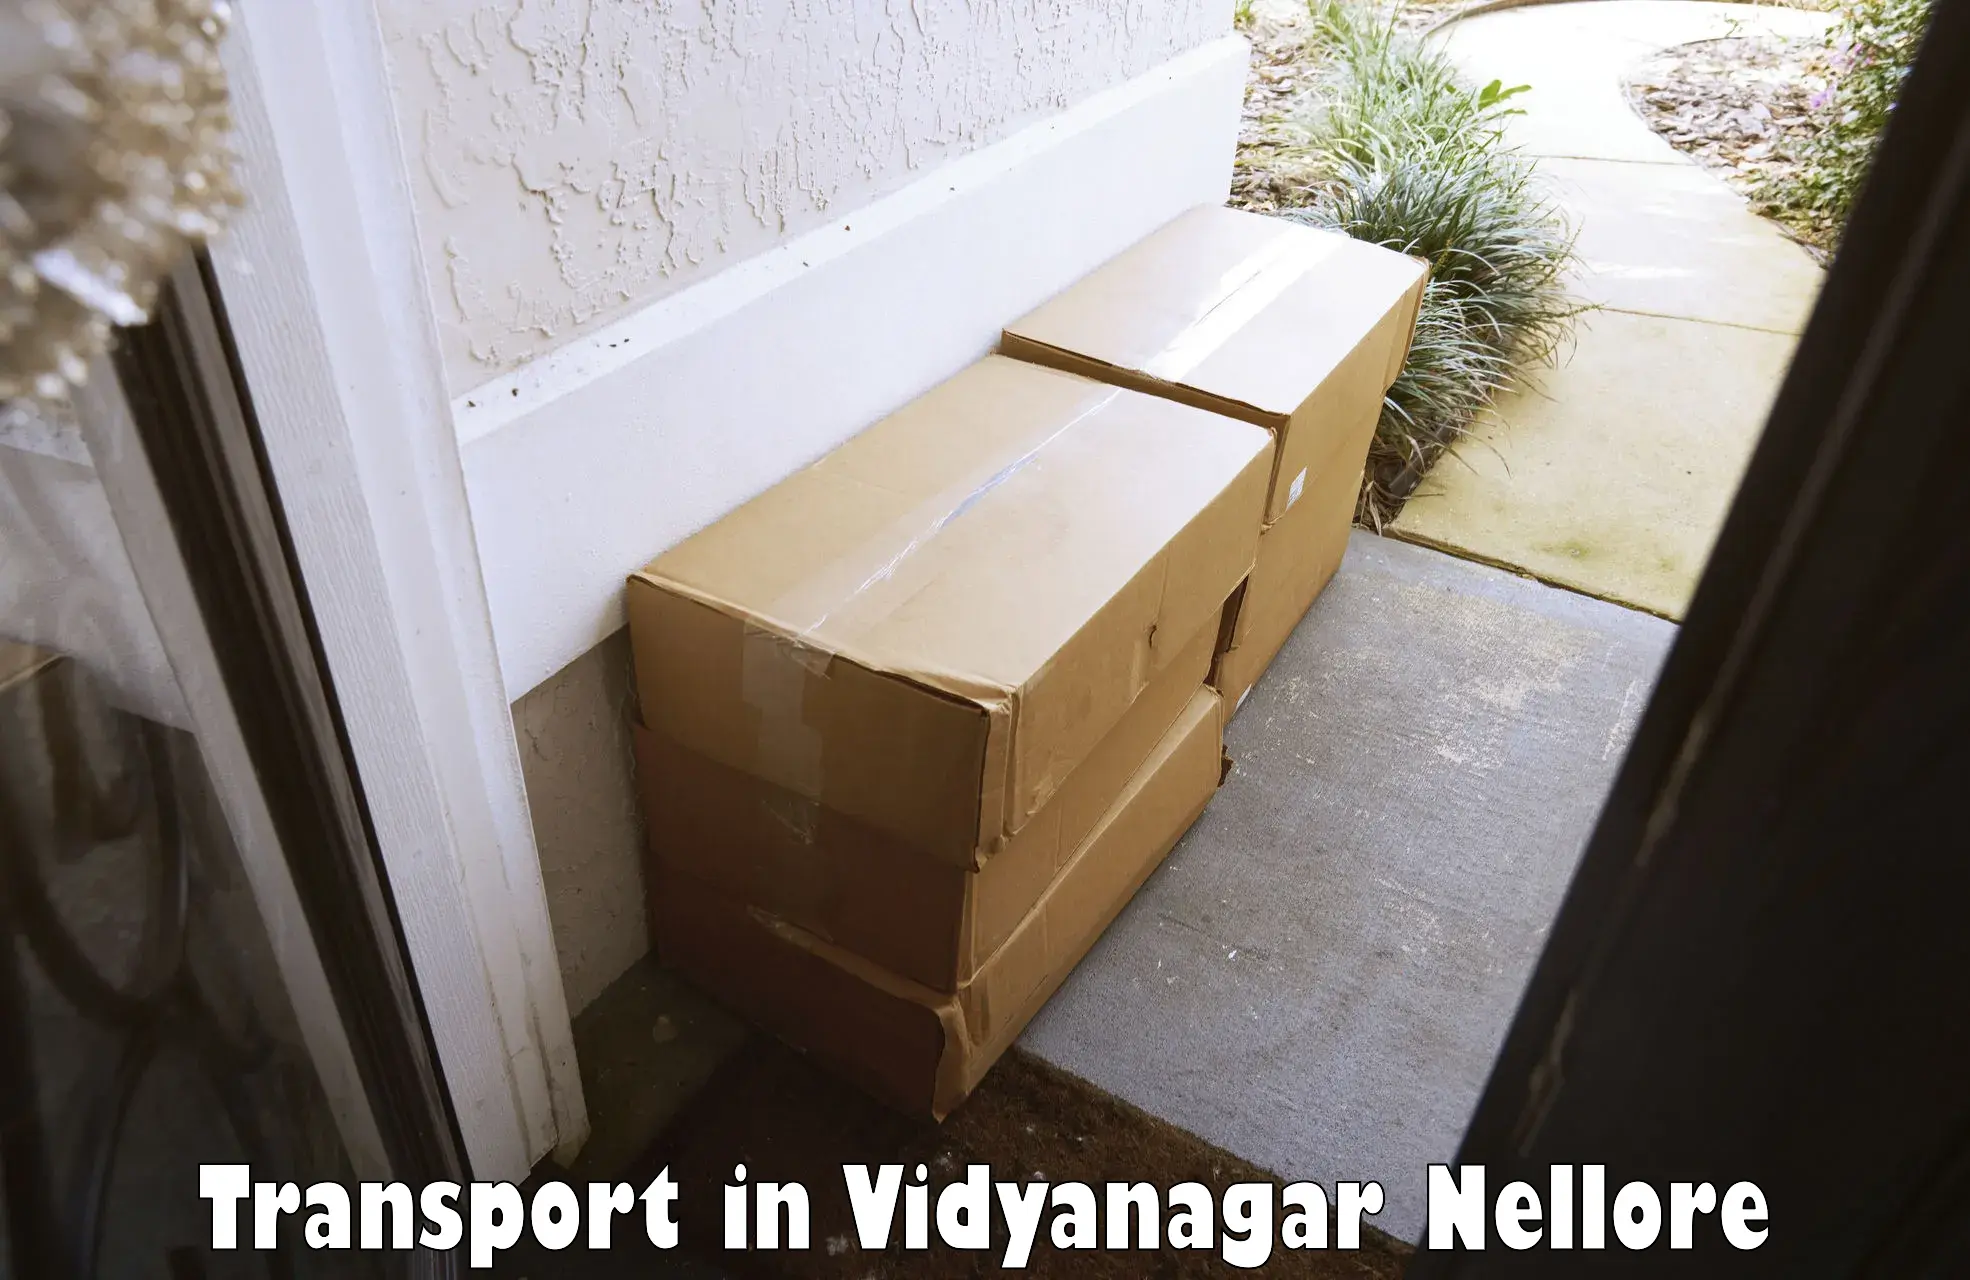 Transport bike from one state to another in Vidyanagar Nellore